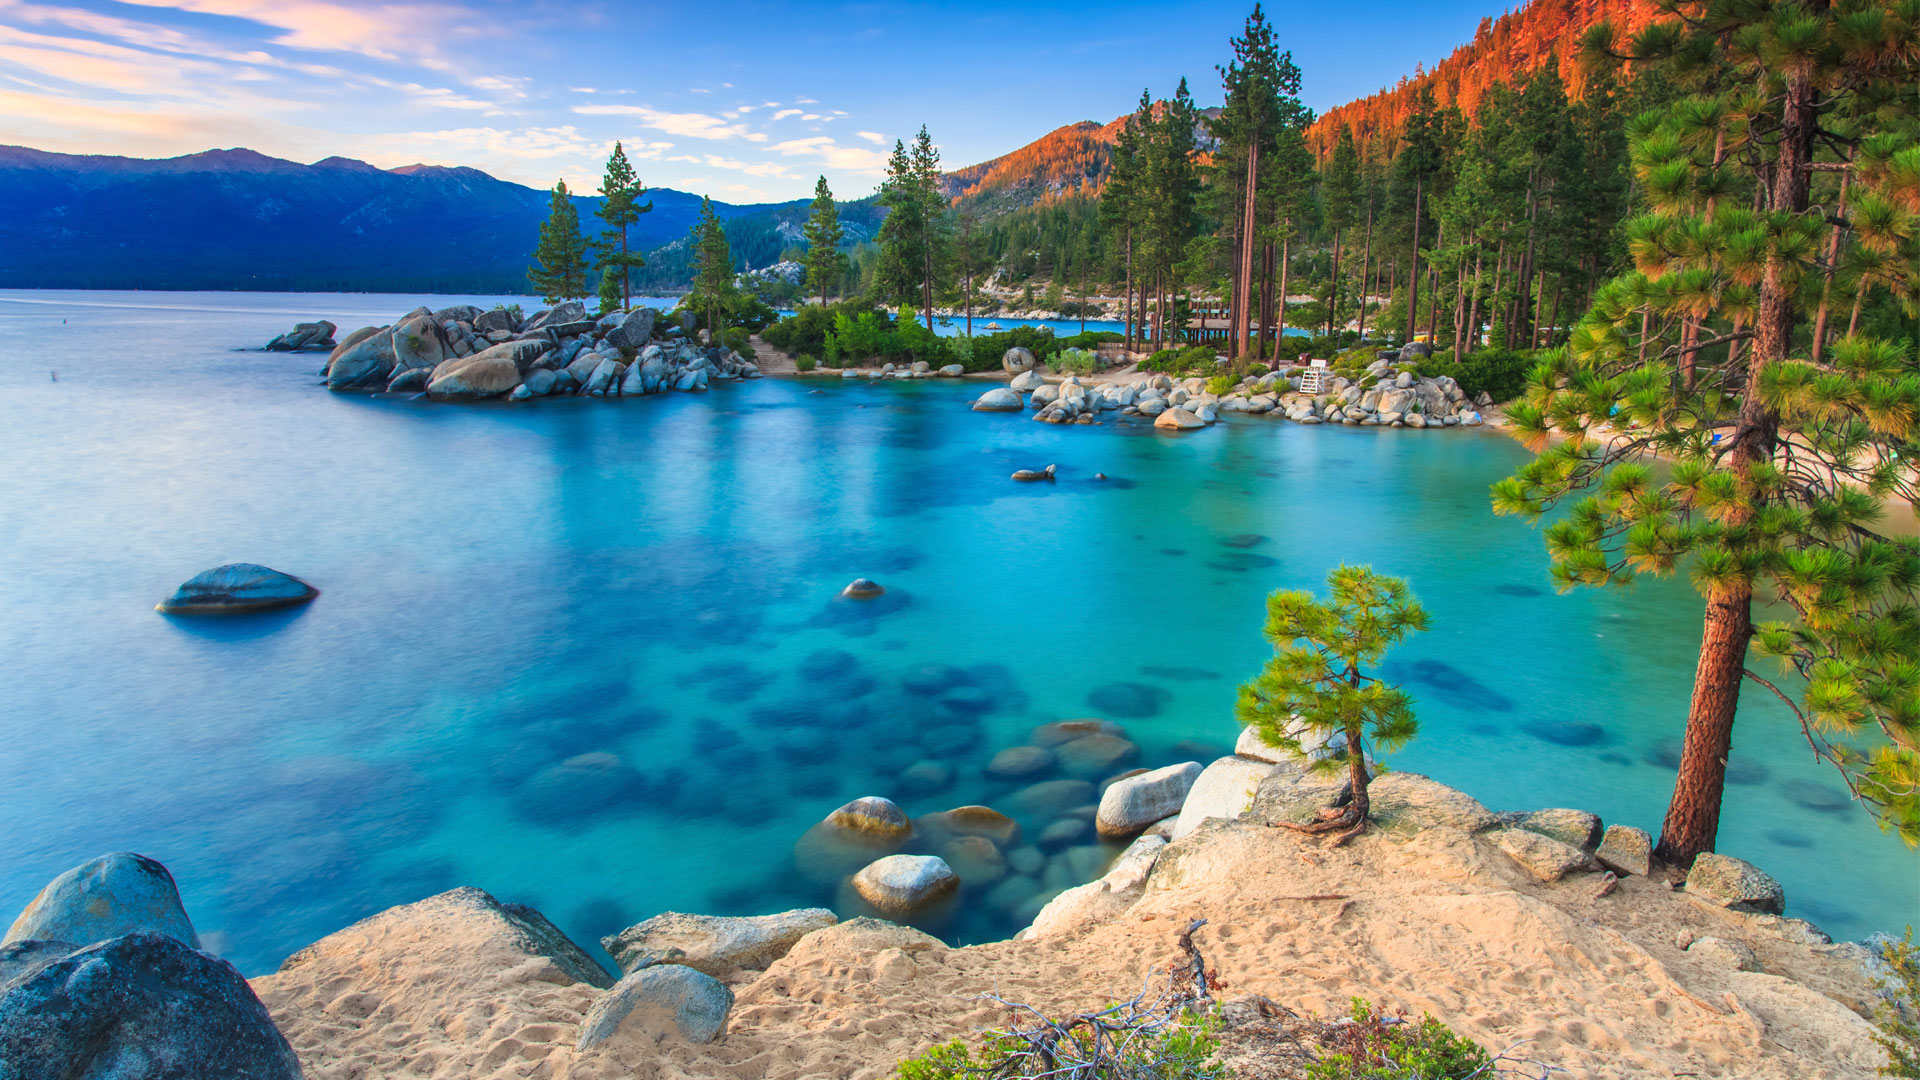 A Report from a Trip to the Lake Tahoe